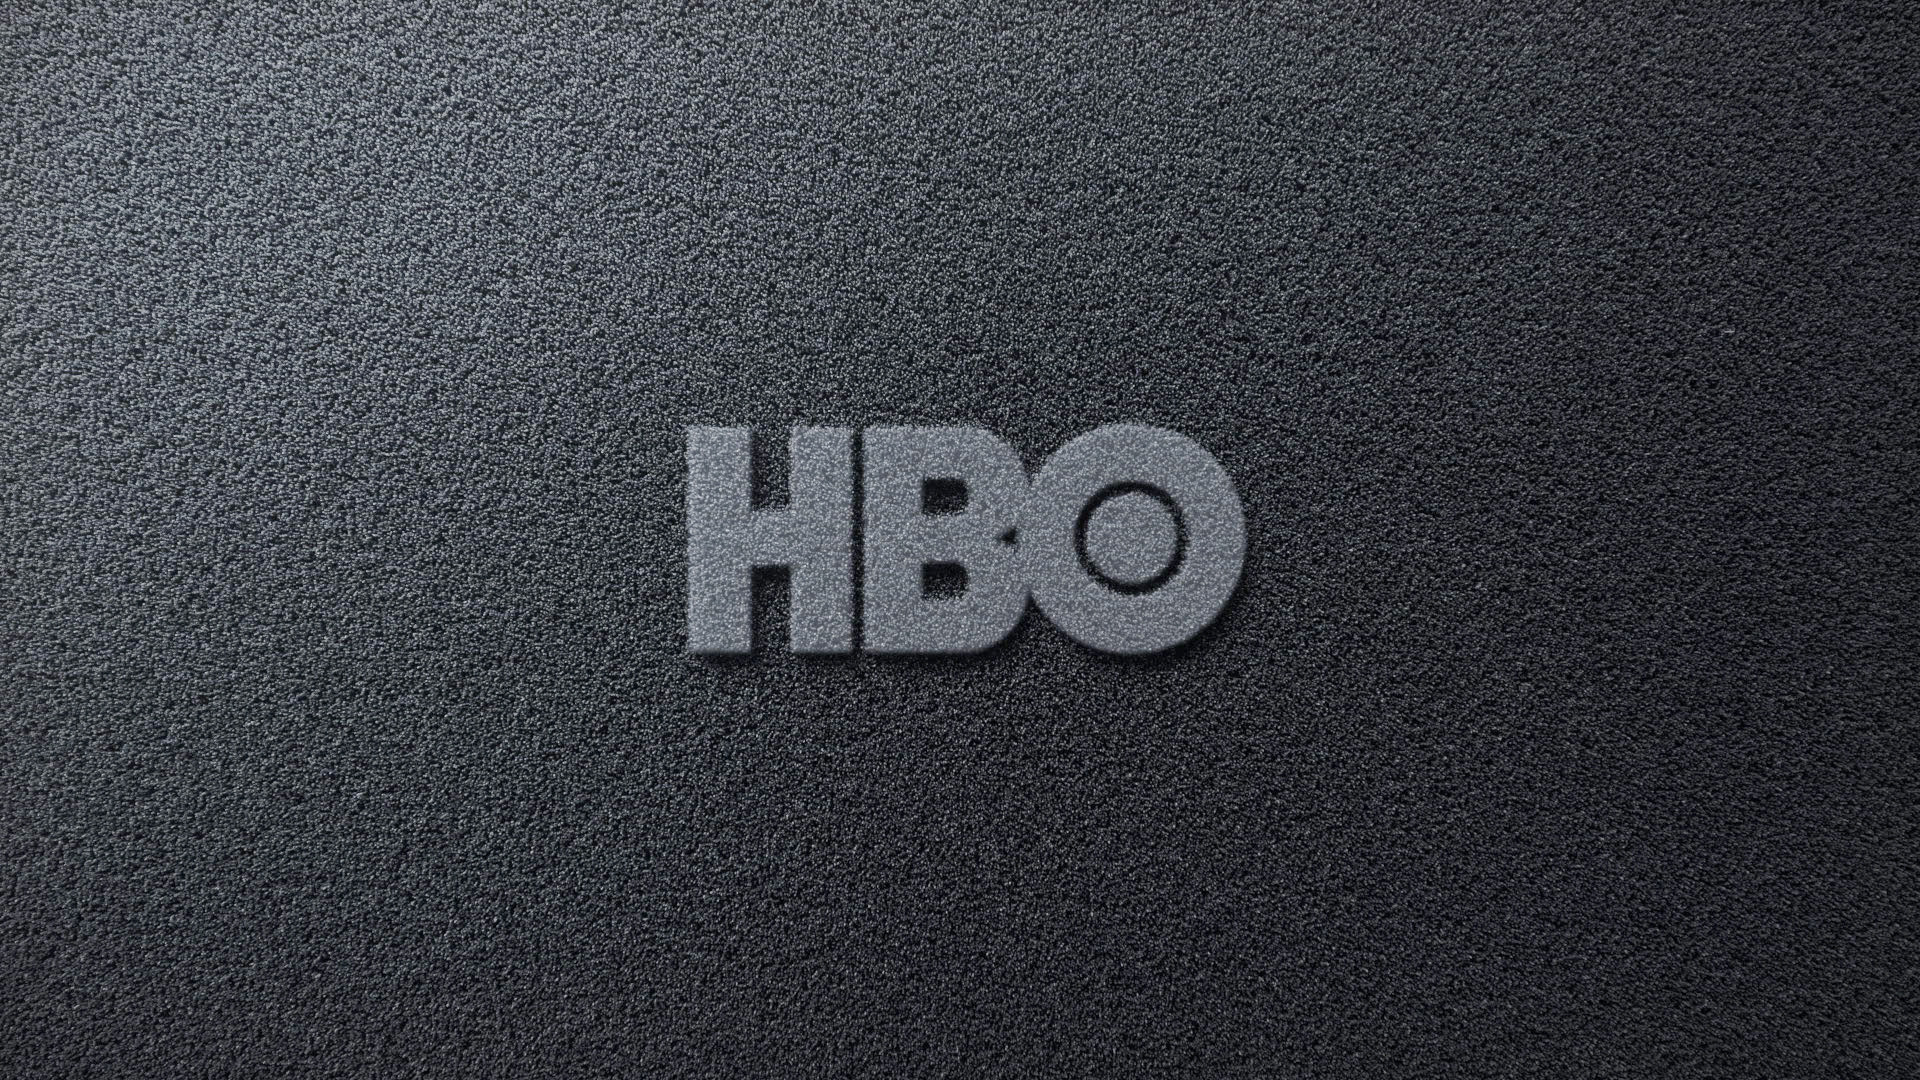 HBO_Story-like-no-other_14